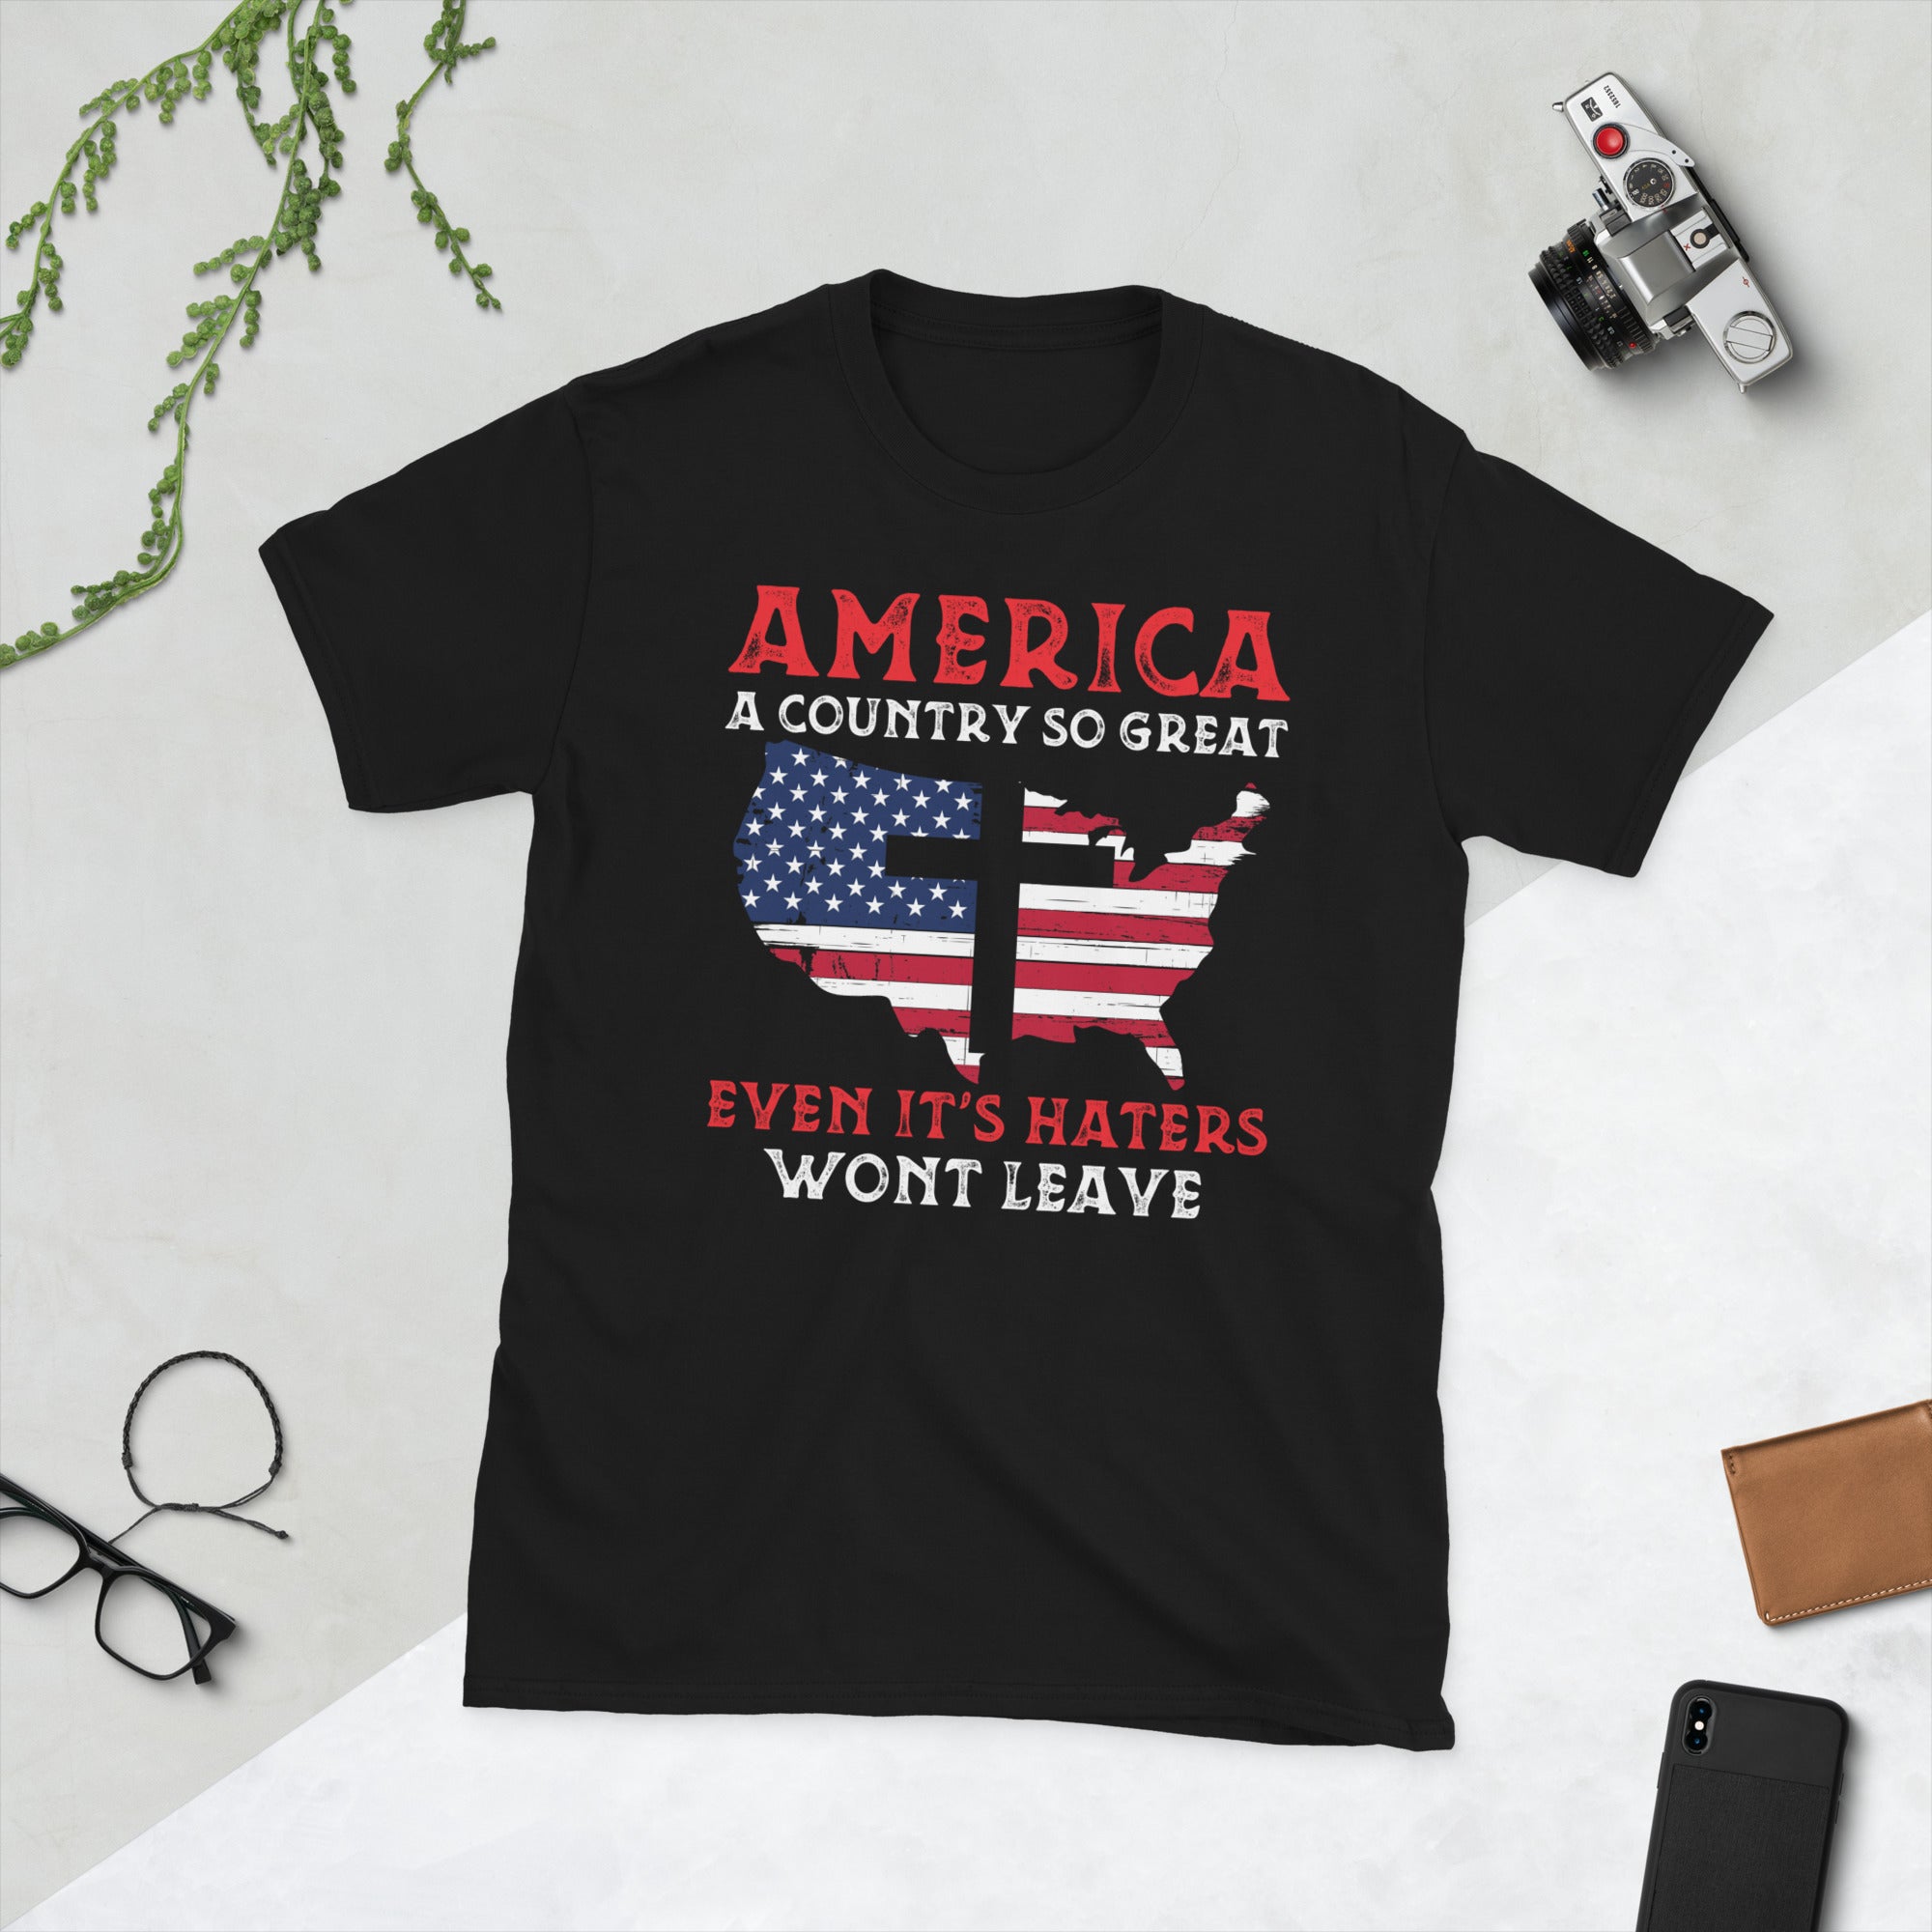 America A Country So Great Even Its Haters Wont Leave Funny 4th Of July Shirt, USA T-Shirt, Girl US Flag Tee, Independence Day, Patriot - Madeinsea©